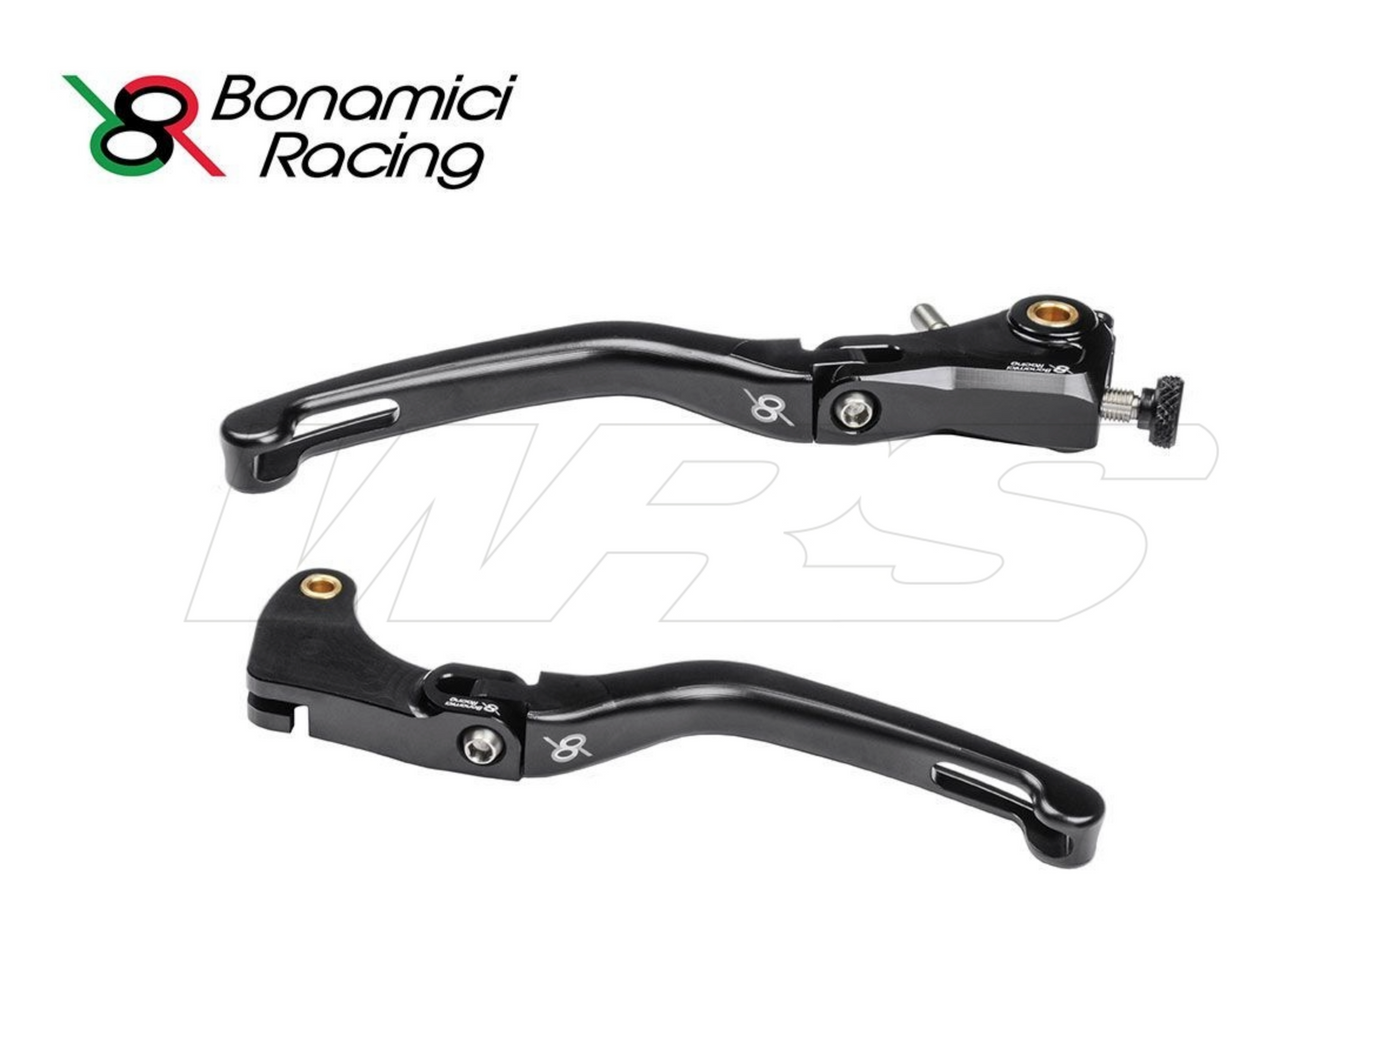 Brake and Clutch Levers Kit for HONDA CBR 1000 RR-R (2020-2023)